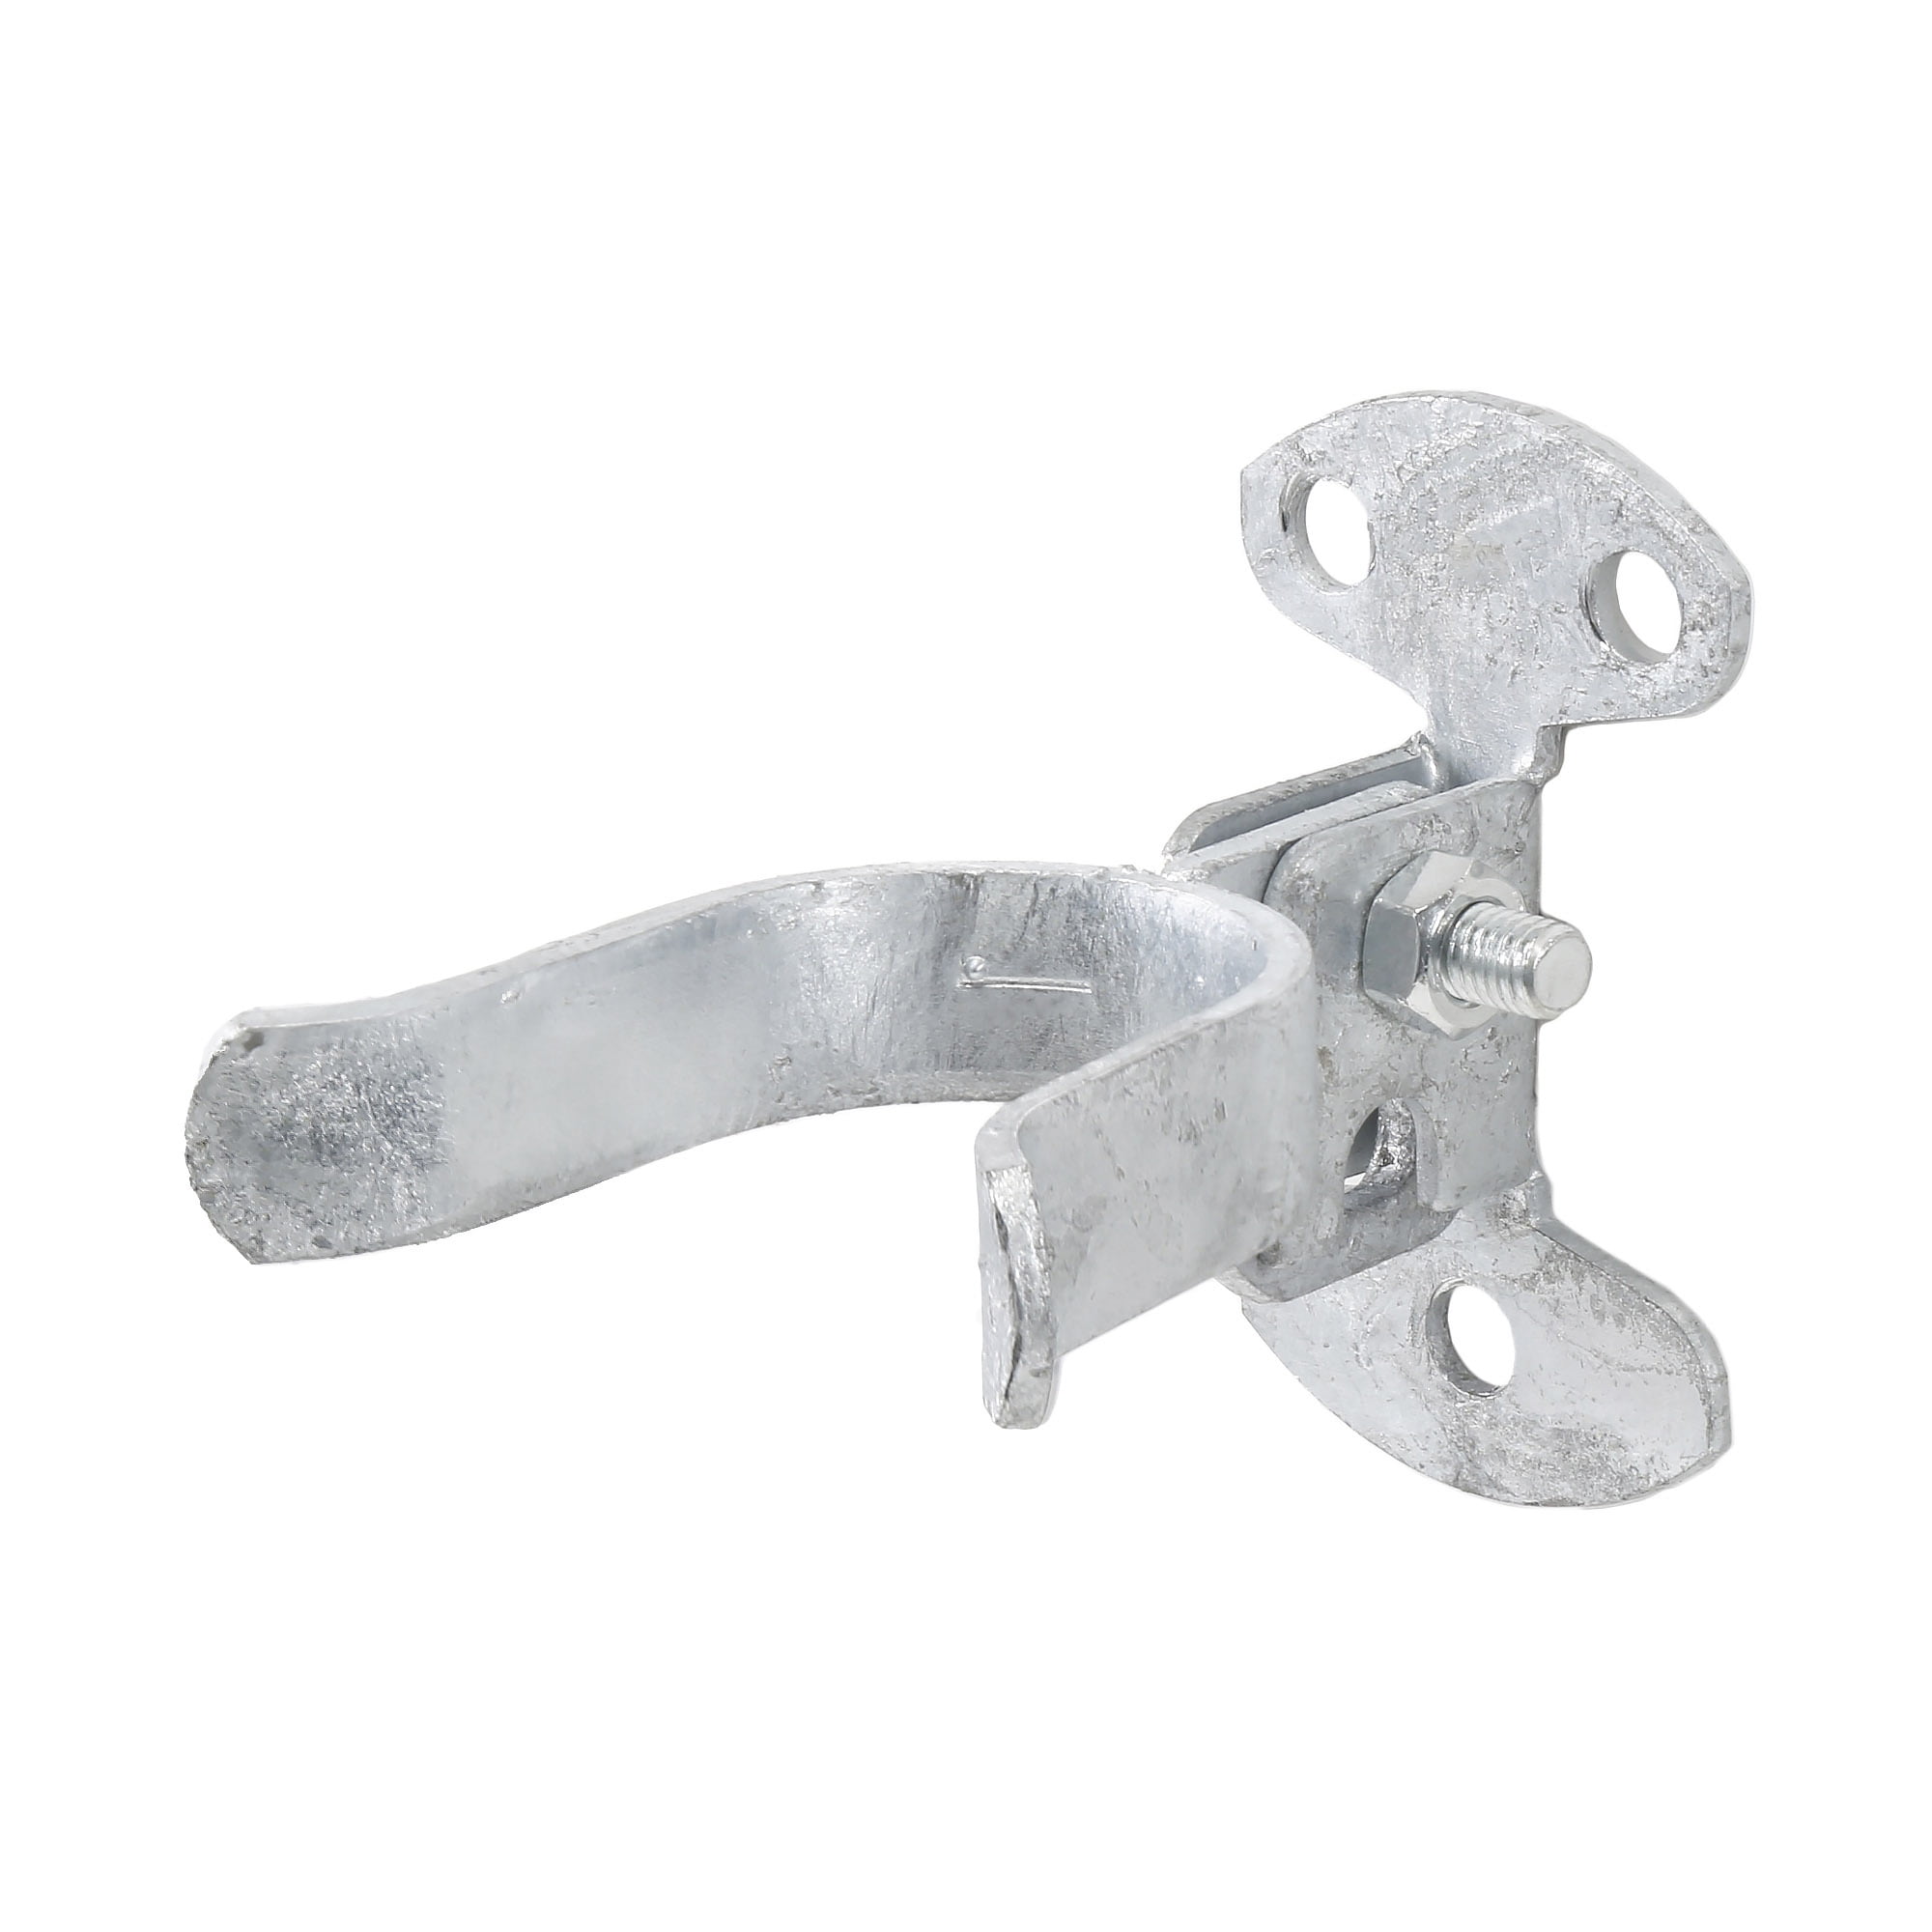 Plum Fittings 1-5/8' Gate Latch for Chain Link Fences | Galvanized Pressed Steel